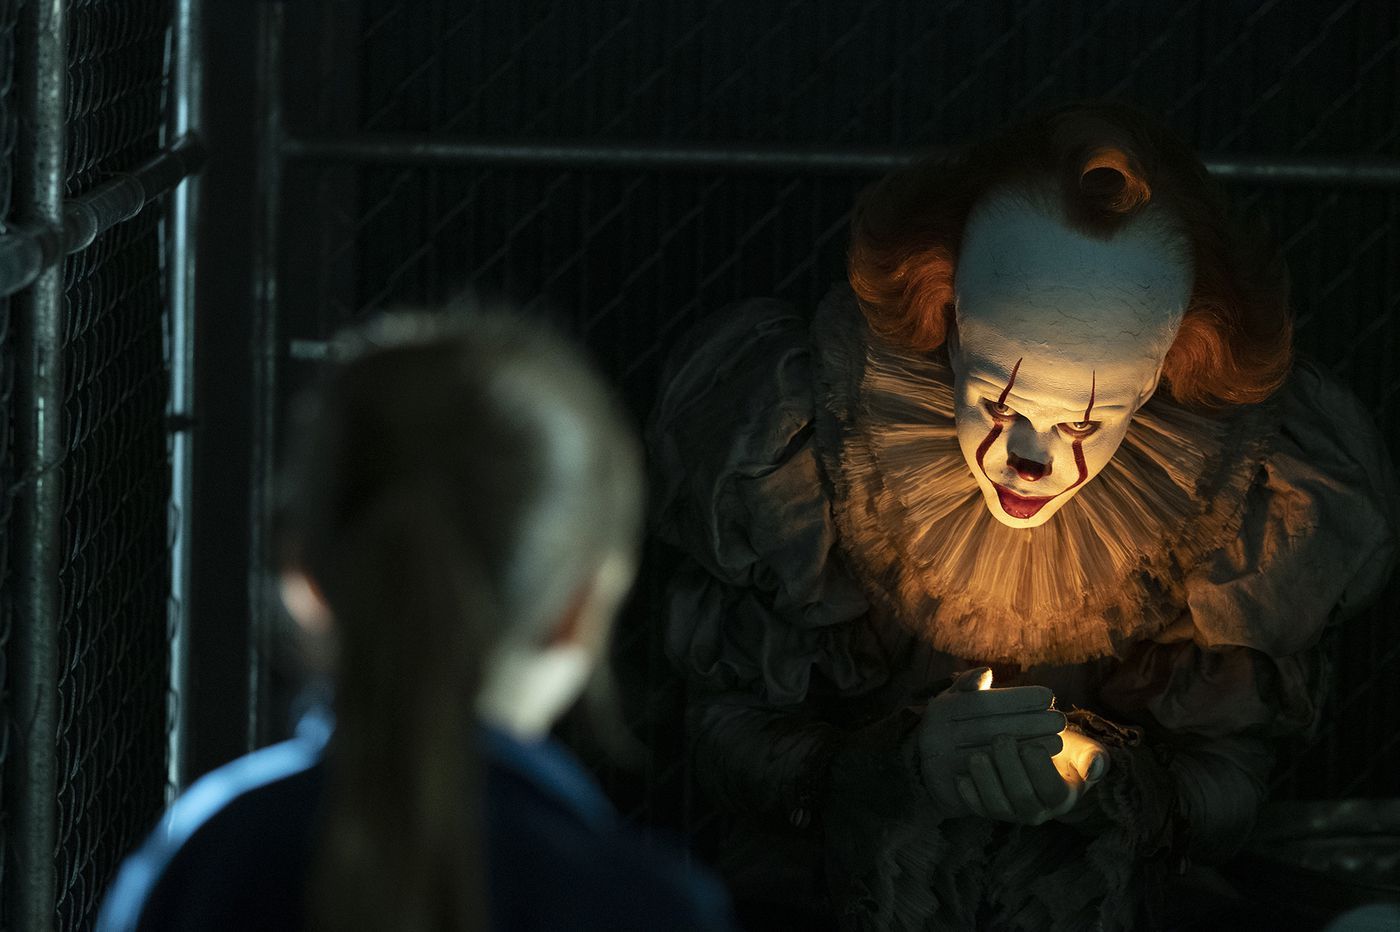 14 Best Horror Movies of 2019 - Scariest New Films of 2019 Year